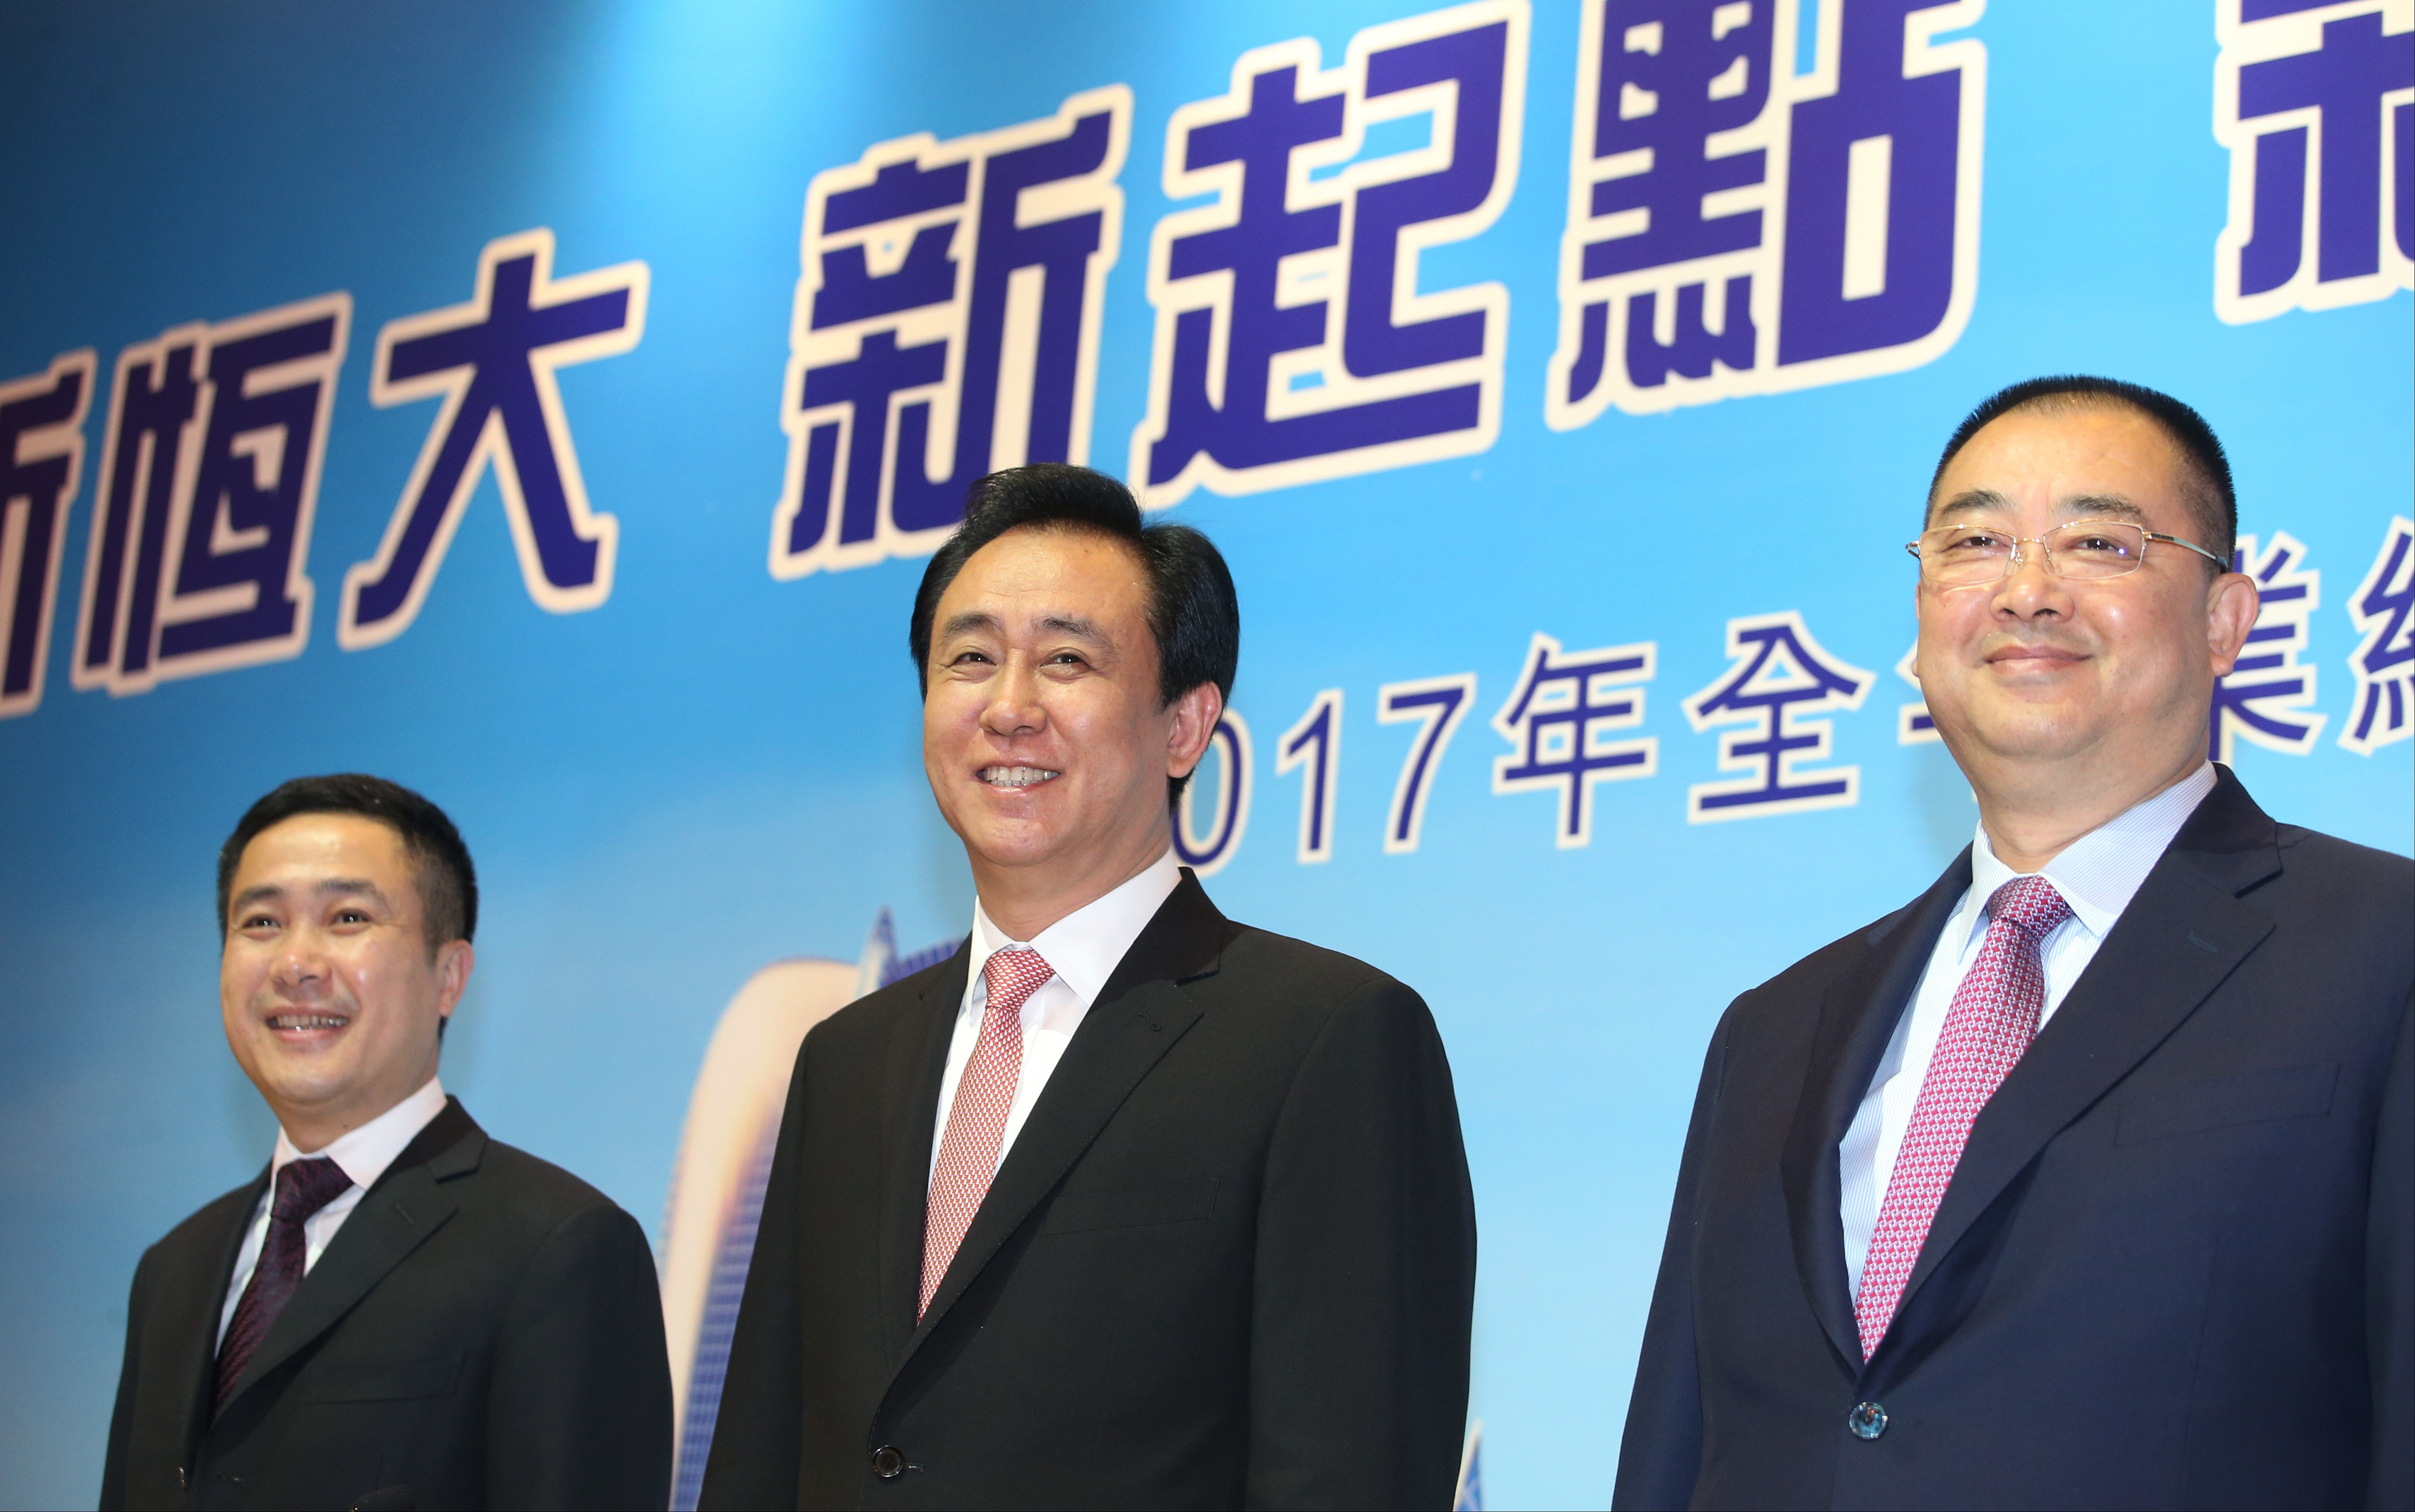 From left, Pan Darong, the executive director and CFO of China Evergrande Group, Hui Ka-yan, Evergrande’s chairman, and Xia Haijun, the company’s vice-chairman and CEO, during the release of the developer’s annual result in Hong Kong on Monday. Photo: David Wong